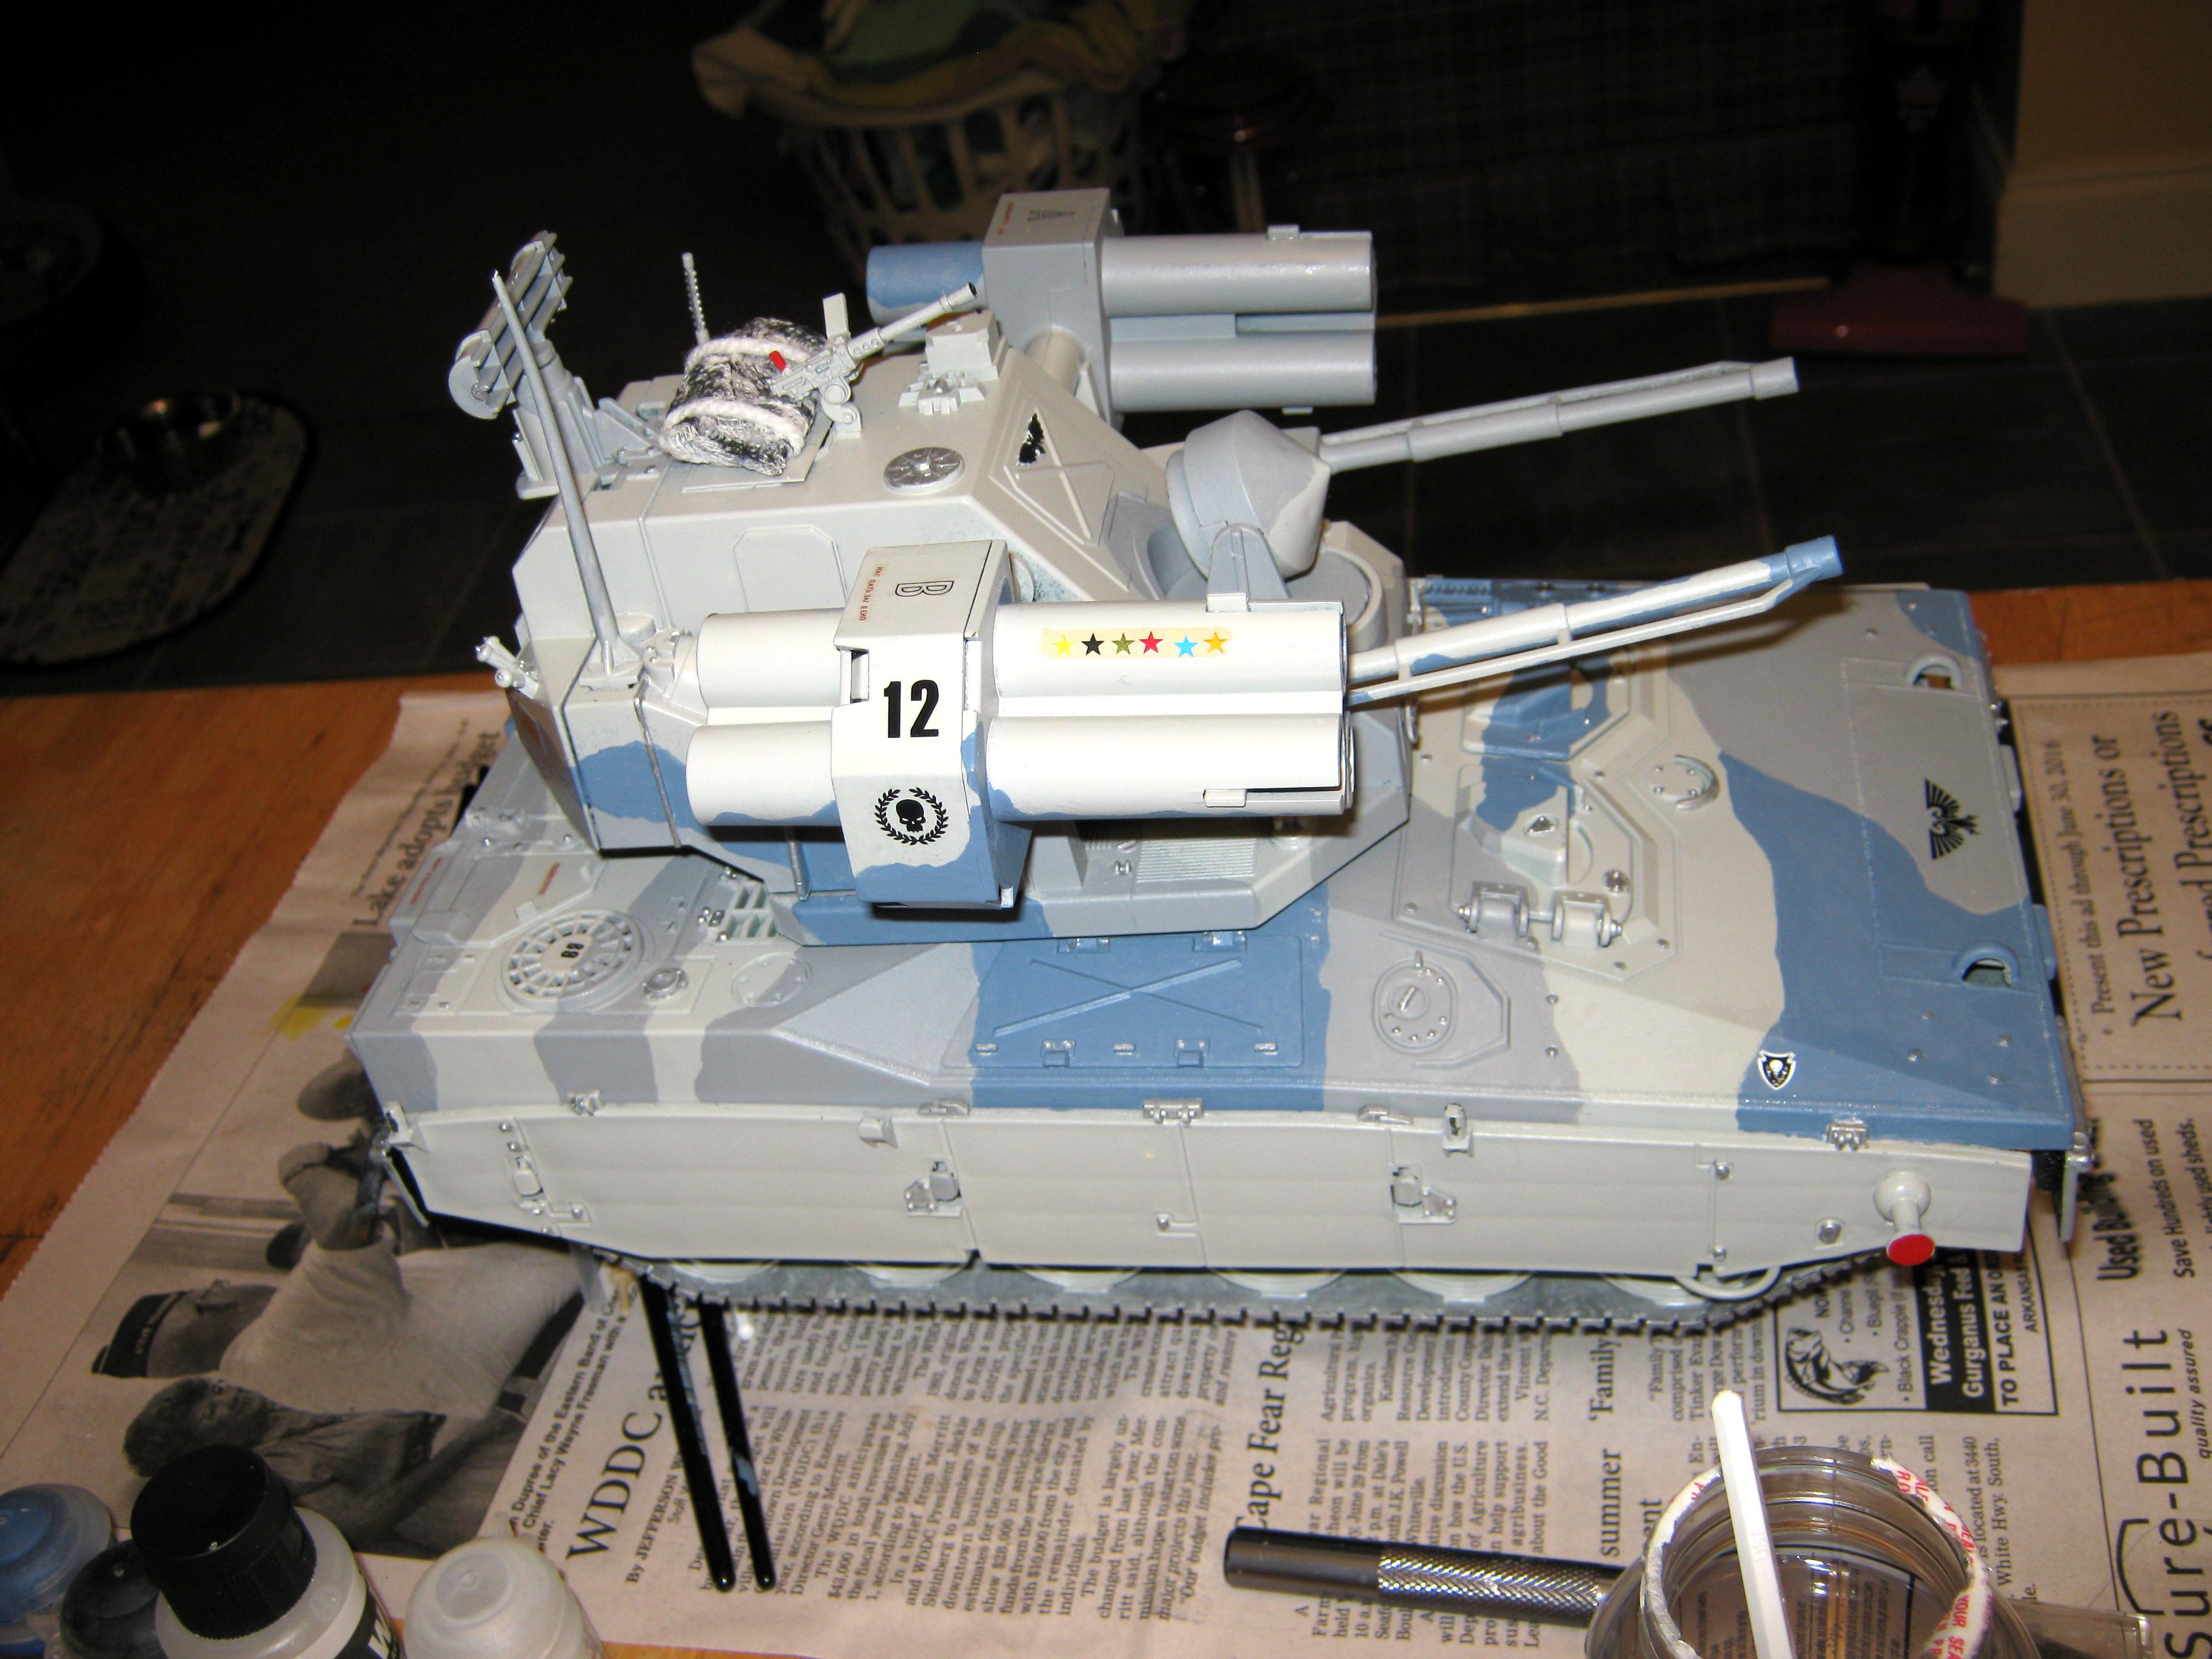 Adv, Afv, Air Defense Vehicle, Anti-aircraft, Artillery, Conversion, Equalizer, G.i. Joe, Imperial, Self-propelled, Super-heavy, Tank, Toy